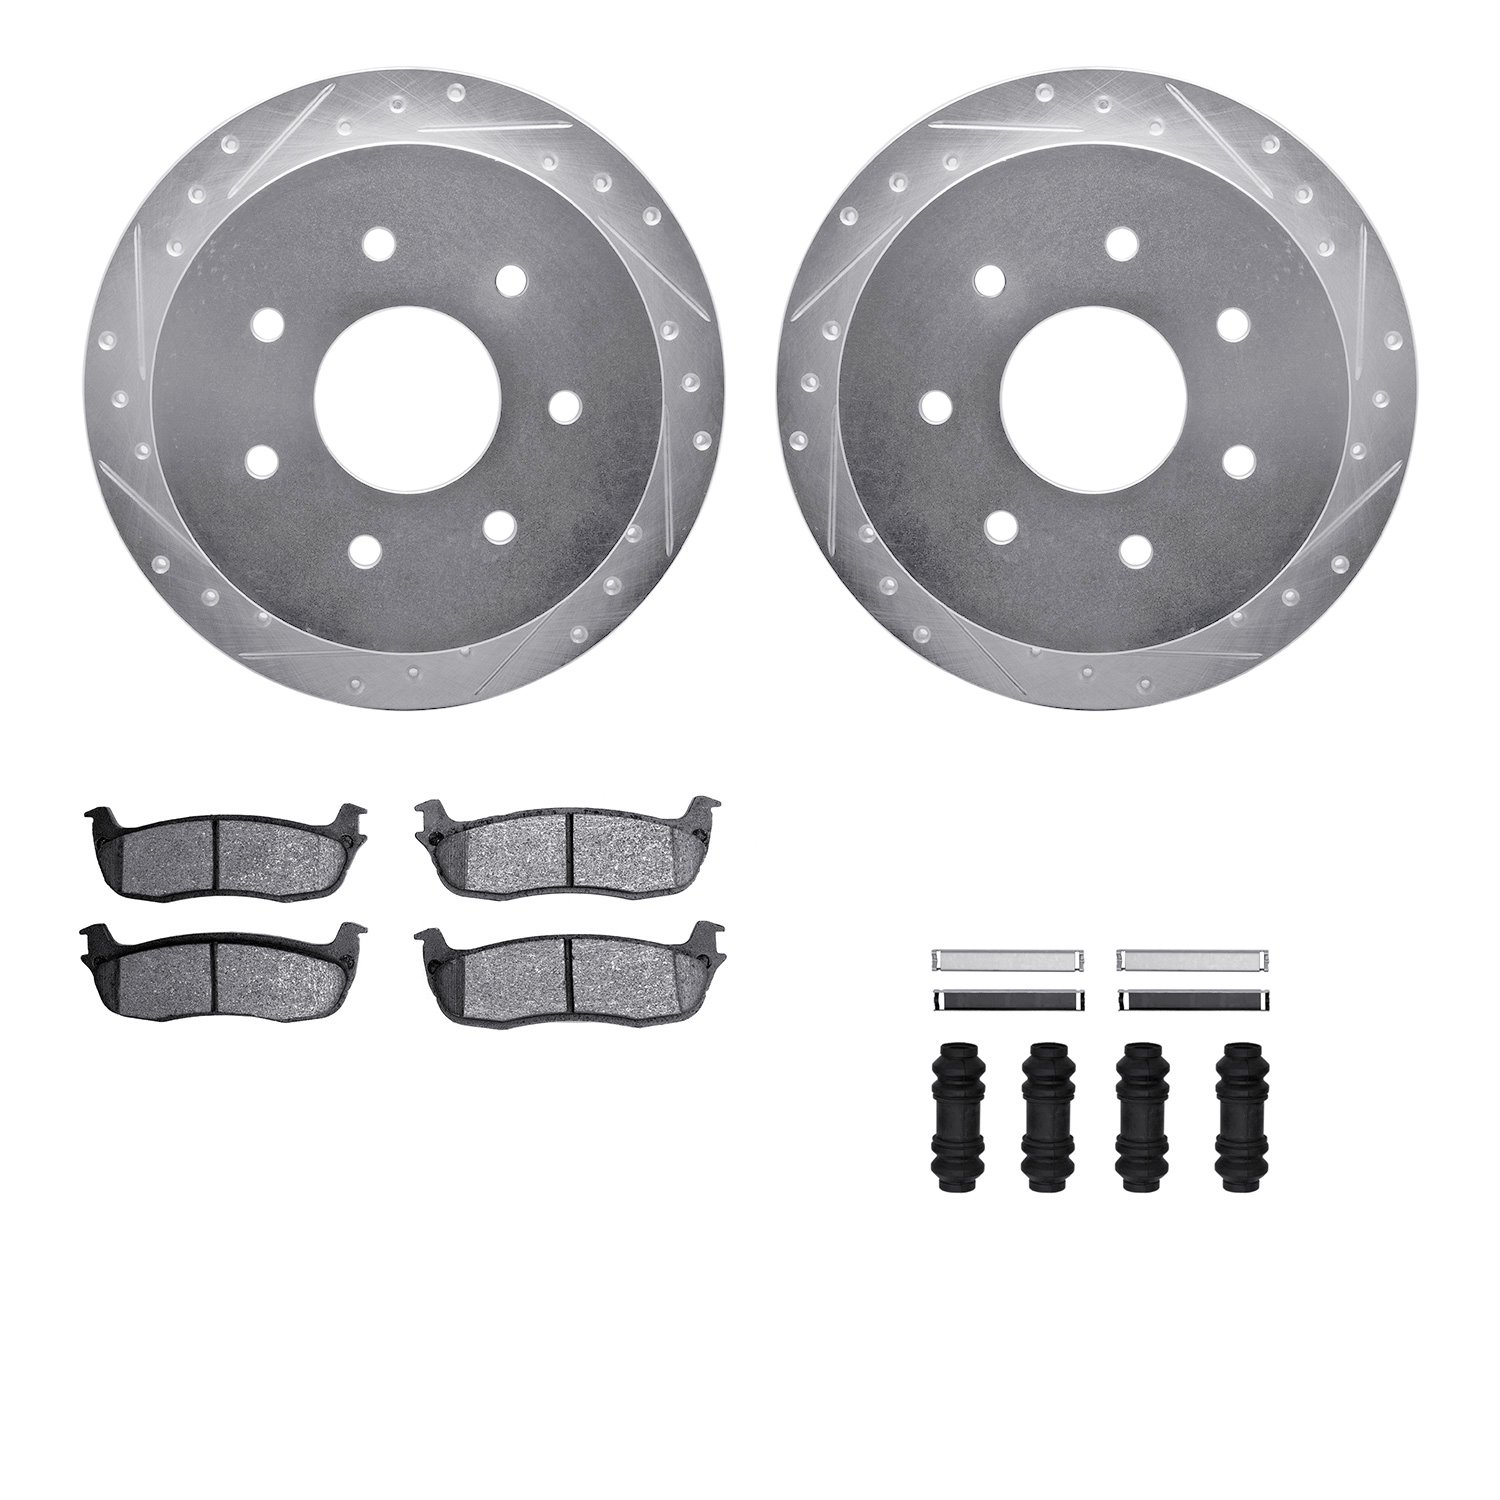 7412-54037 Drilled/Slotted Brake Rotors with Ultimate-Duty Brake Pads Kit & Hardware [Silver], 1997-2004 Ford/Lincoln/Mercury/Ma